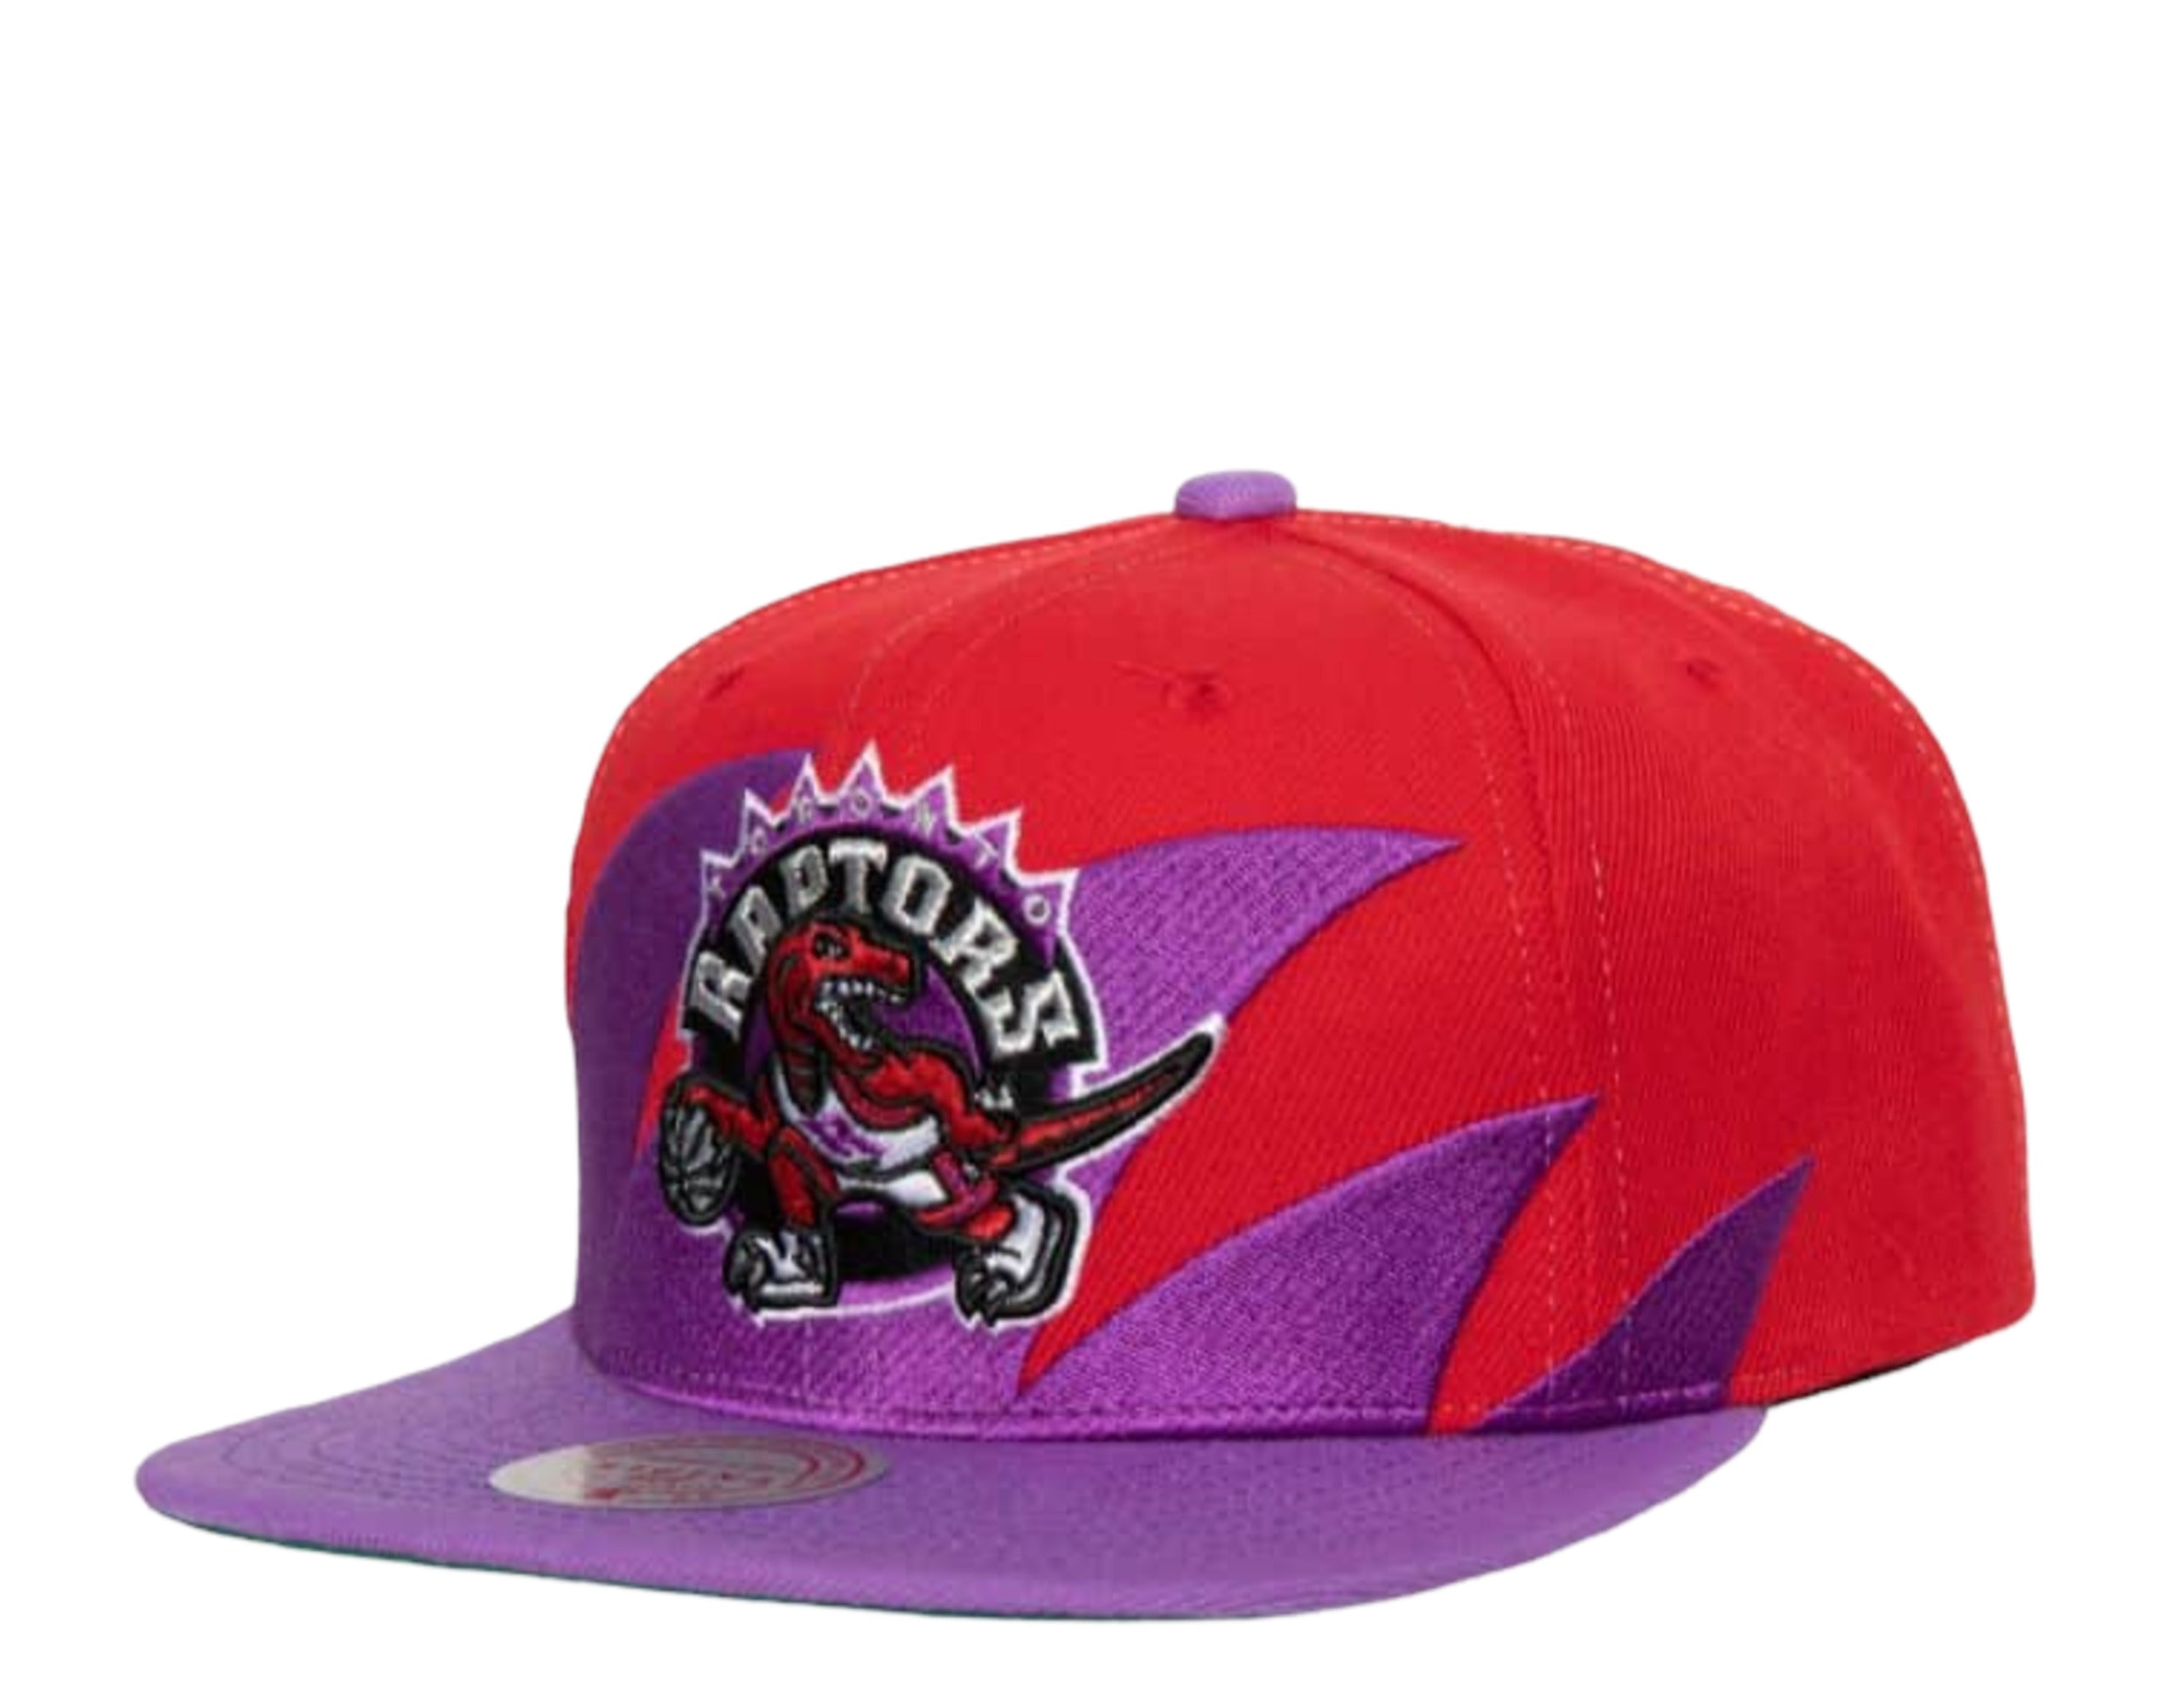 Mitchell & Ness Sharktooth New Jersey Devils Snapback Hat - White, Red